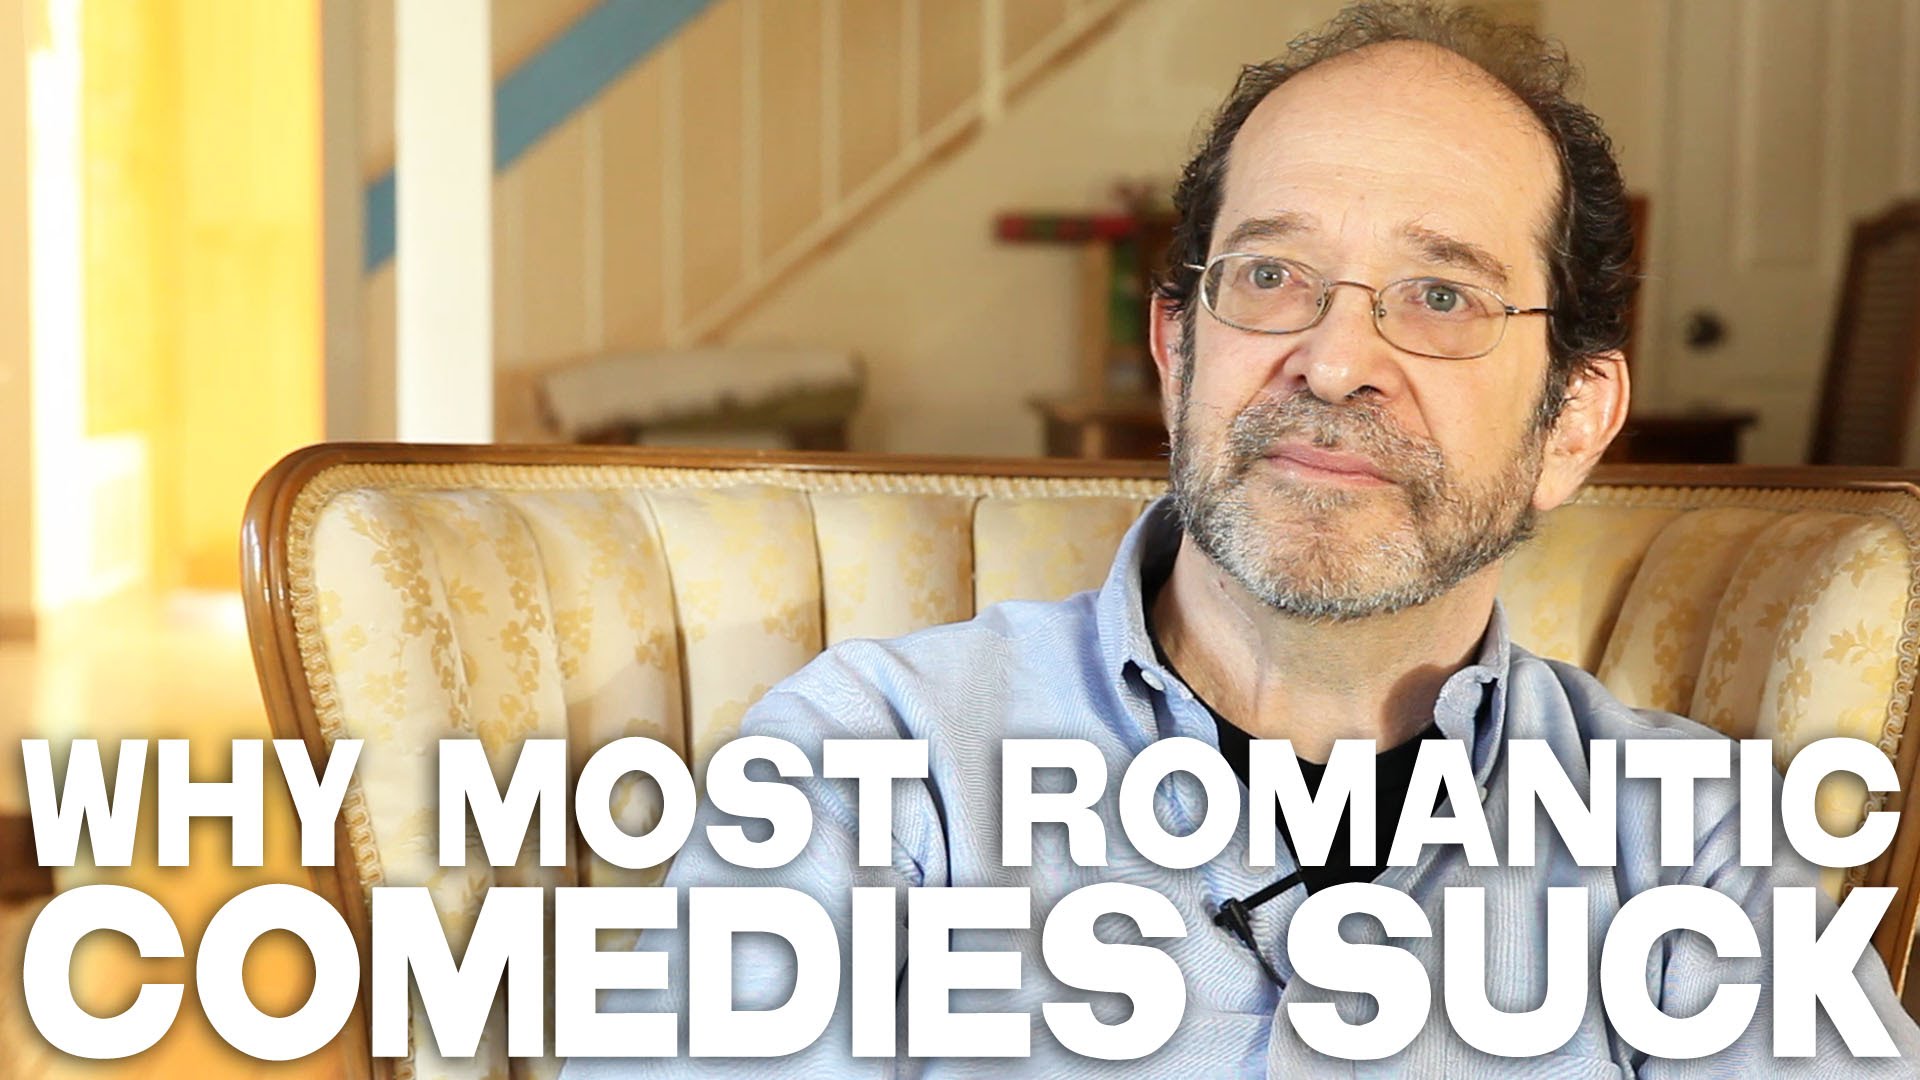 The Truth about Romantic Comedies by Sean C. McMurray